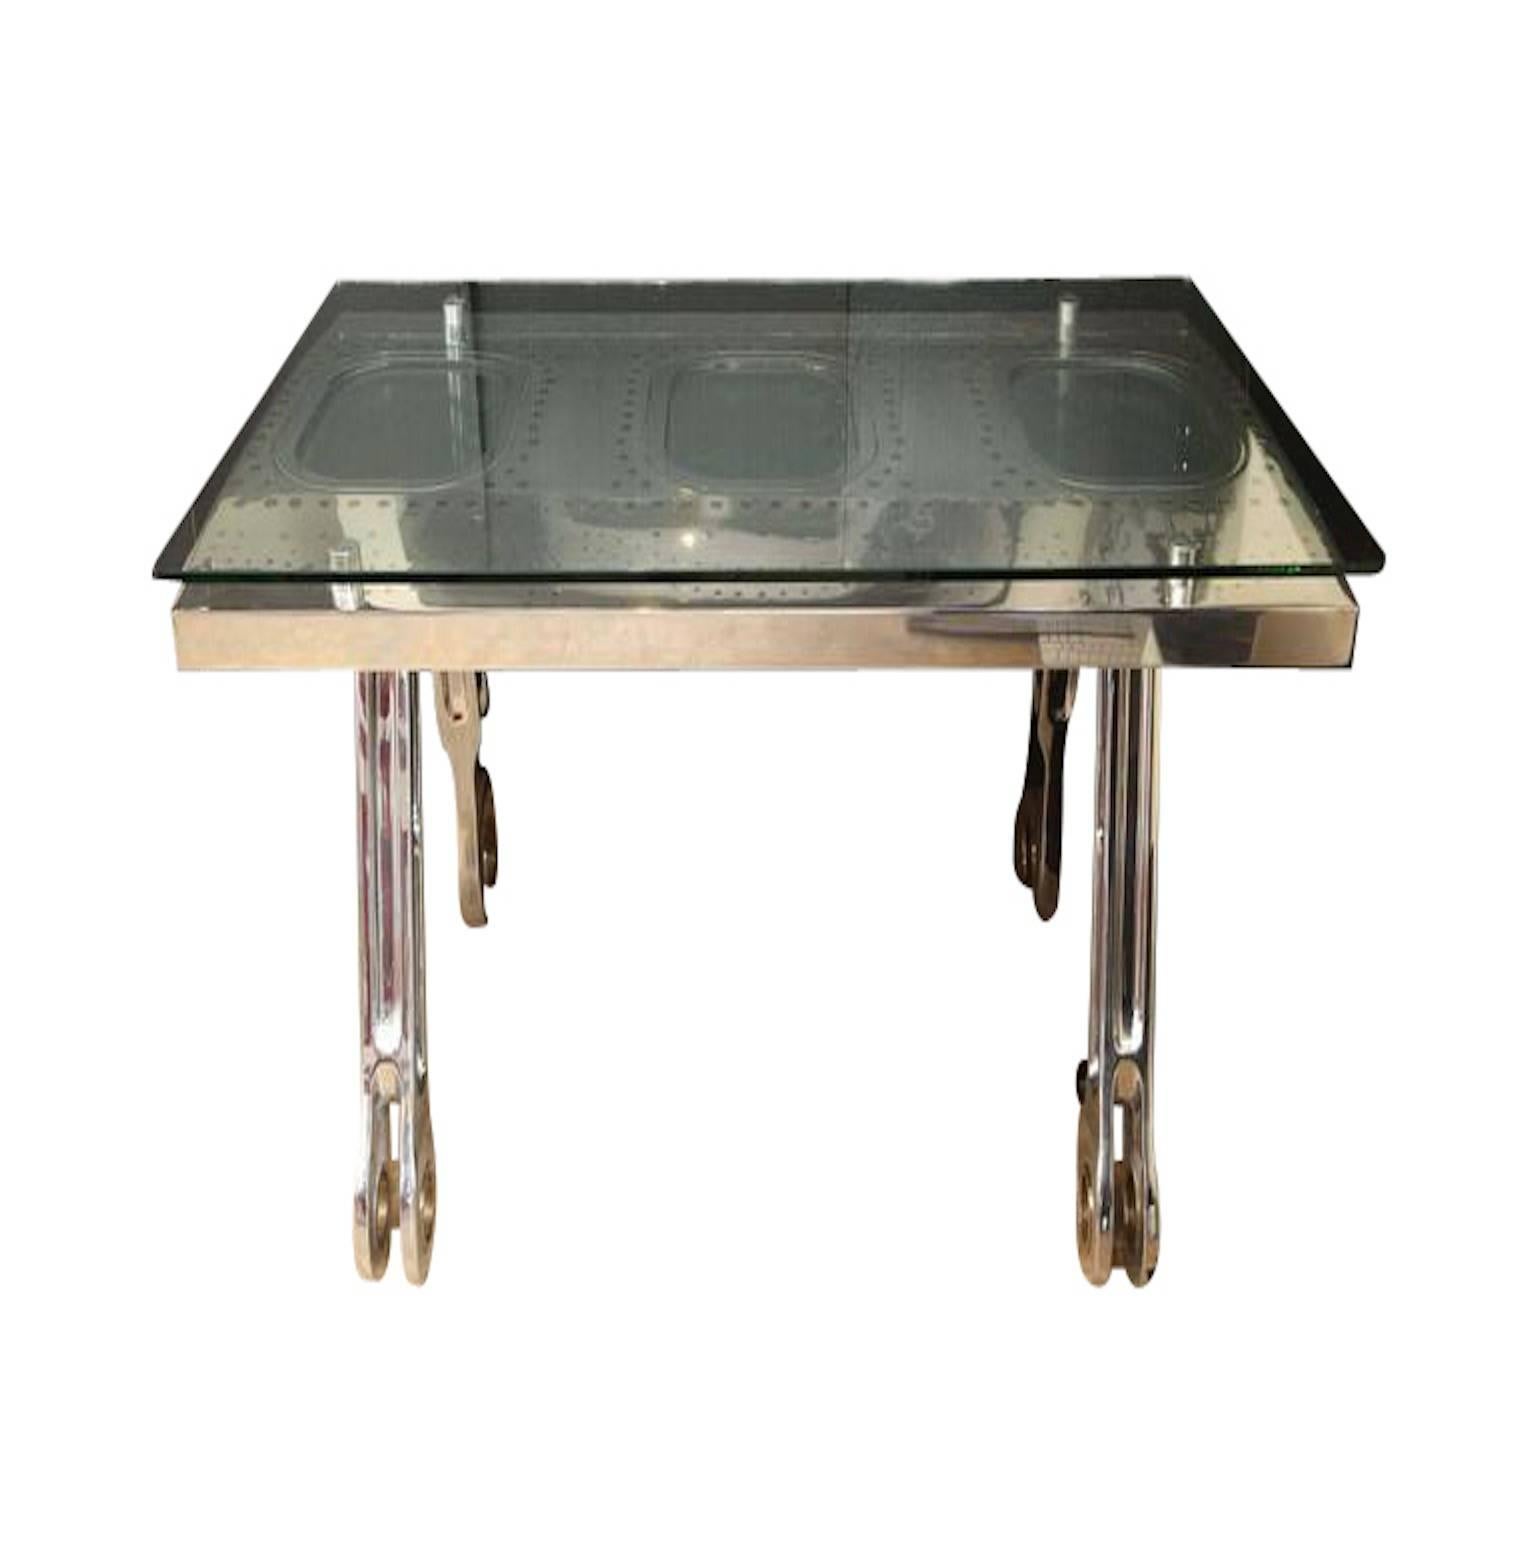 This desk consists of three windows cut from the side of a Boeing 747 plane, and the base of the desk is the landing gear. It is sure to be the statement piece in any office setting.
 